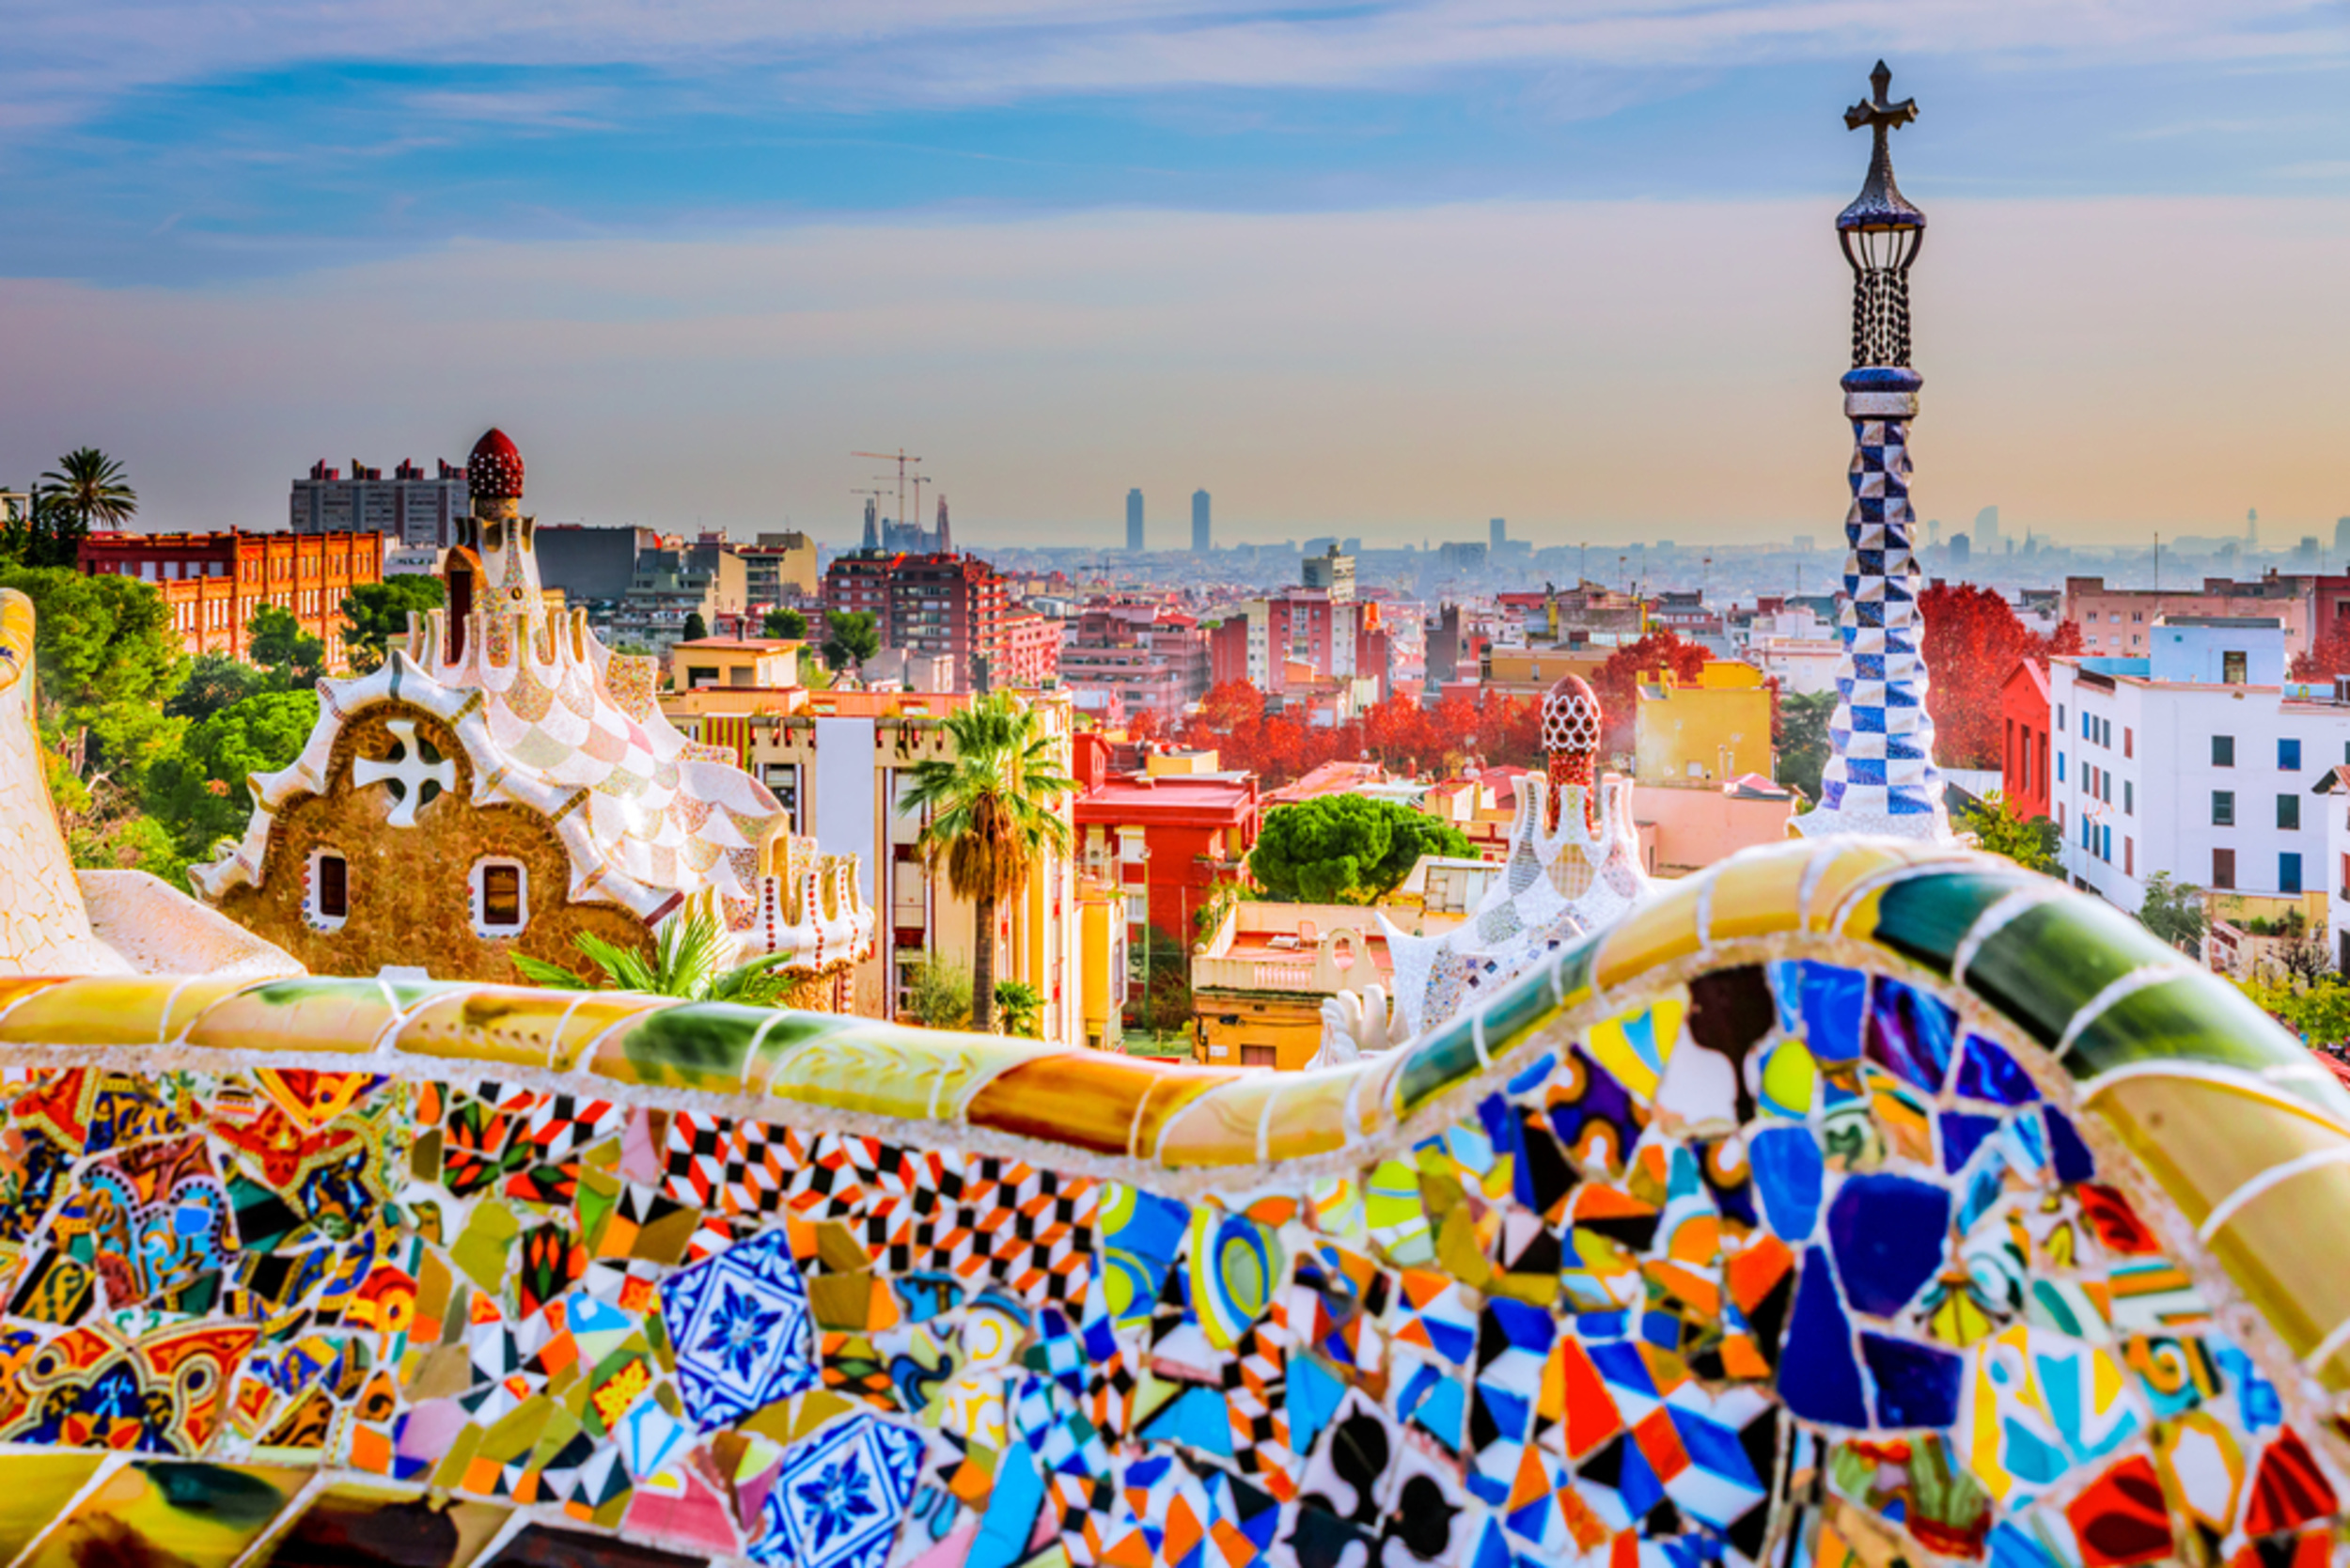 <p>Art fanatics simply must make Barcelona a priority on their travel bucket list. Museums dedicated to Pablo Picasso and Joan Miro await, along with so many stunning architectural sites. </p><p>You may also like: <a href='https://www.yardbarker.com/lifestyle/articles/our_20_all_time_favorite_comfort_foods_111523/s1__39121600'>Our 20 all-time favorite comfort foods</a></p>